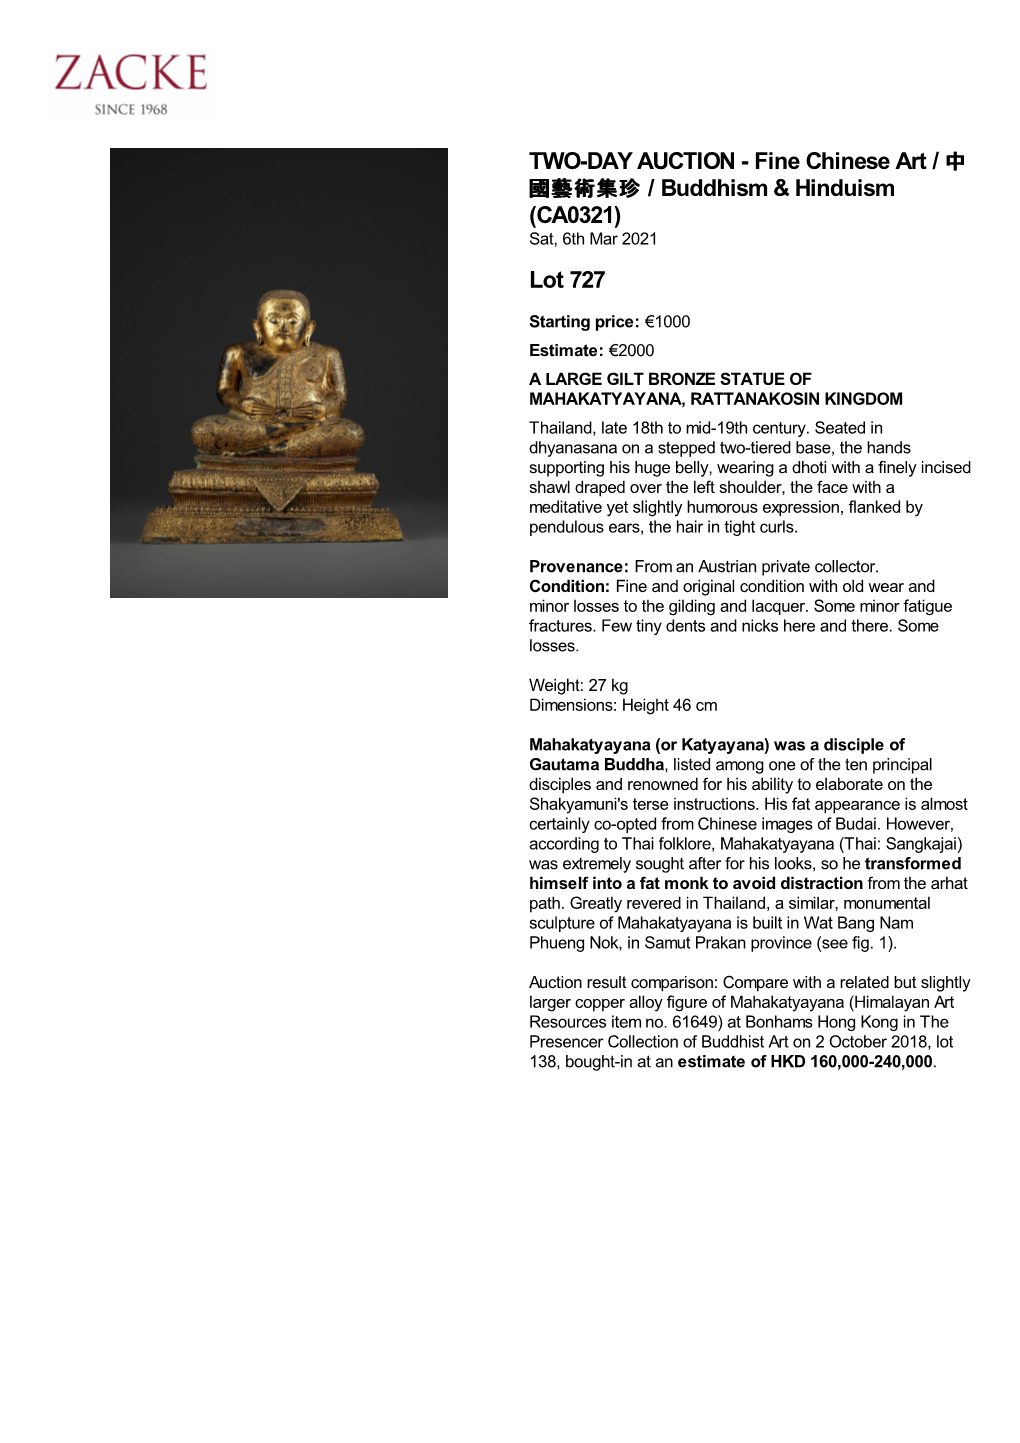 TWO-DAY AUCTION - Fine Chinese Art / 中 國藝術集珍 / Buddhism & Hinduism (CA0321) Sat, 6Th Mar 2021 Lot 727